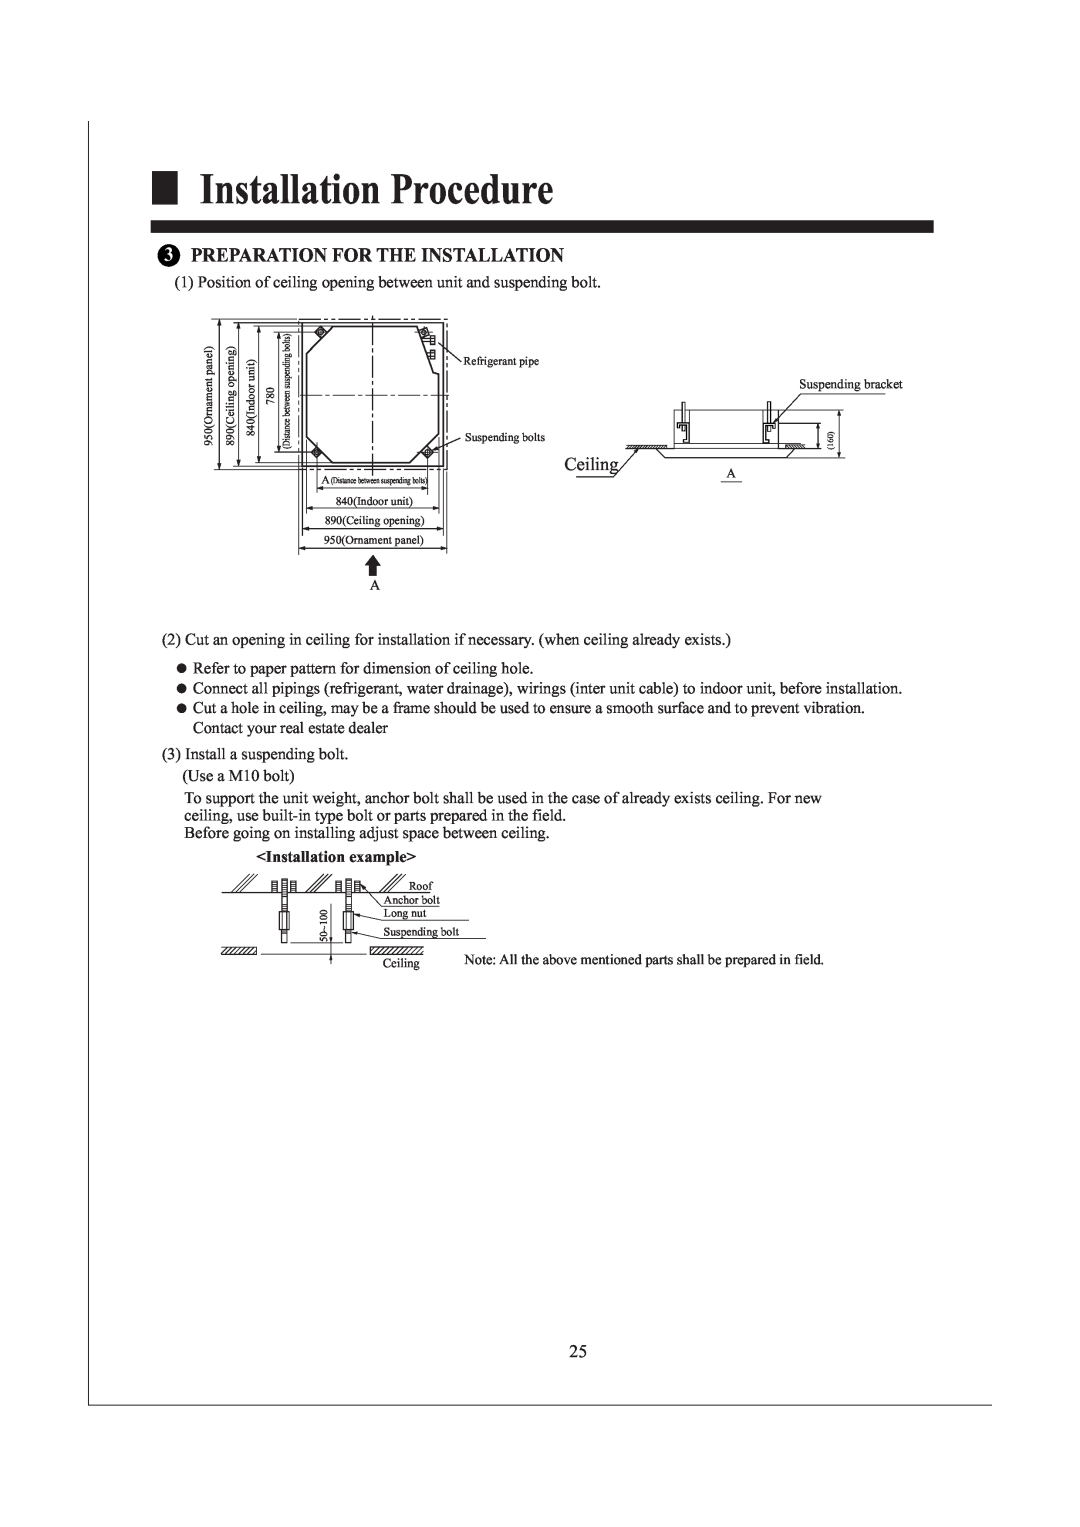 Haier AB242XCAAA operation manual Installation Procedure, Preparation For The Installation, Ceiling, Installation example 